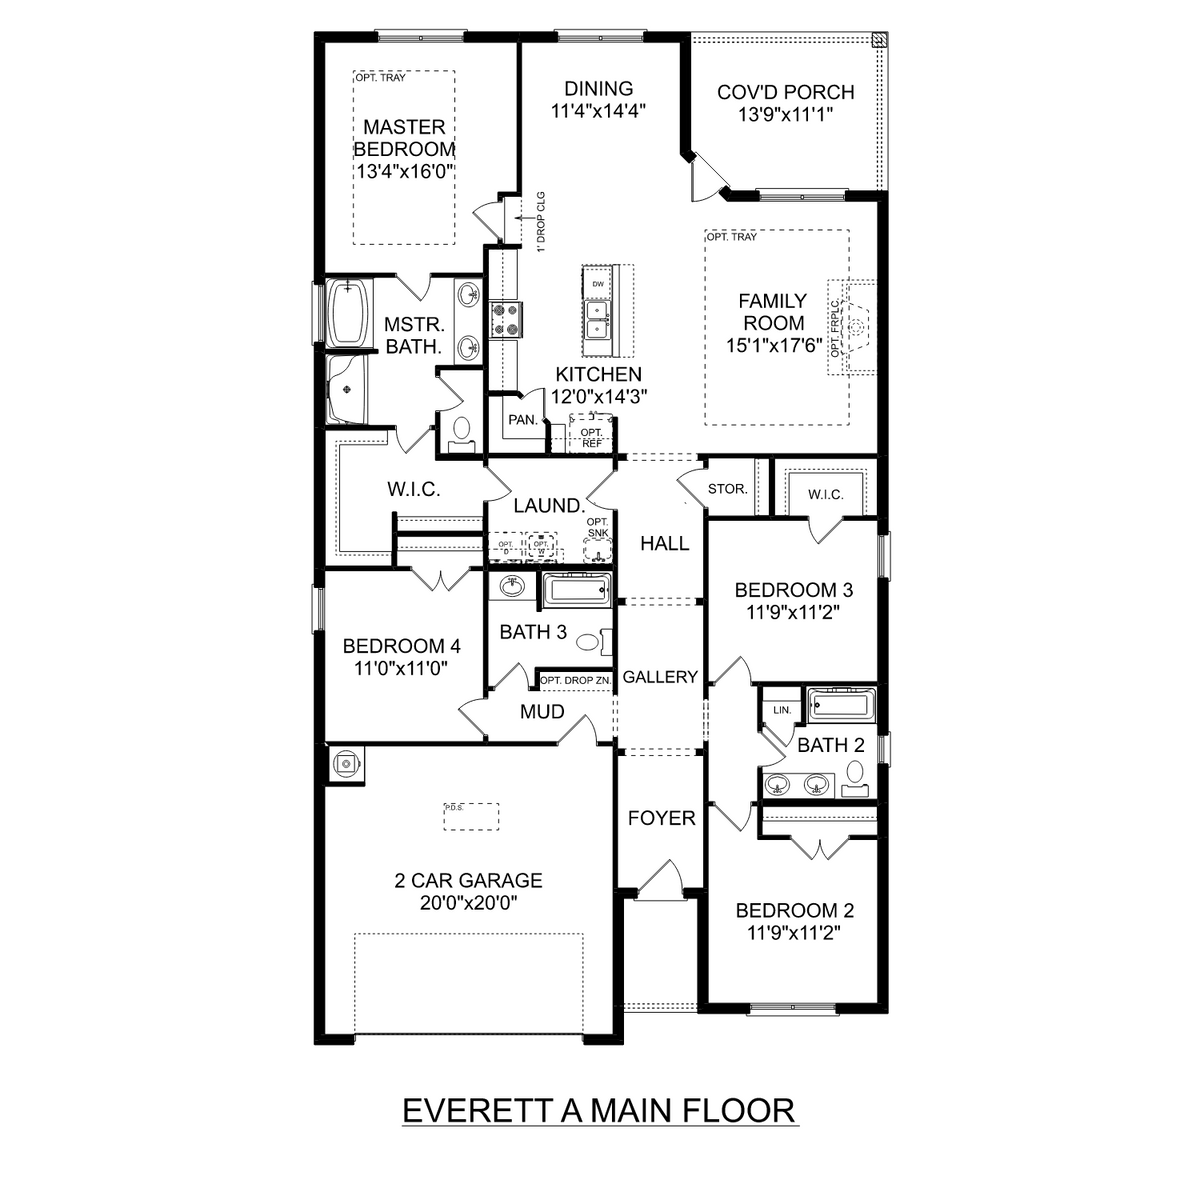 1 - The Everett buildable floor plan layout in Davidson Homes' The Meadows community.